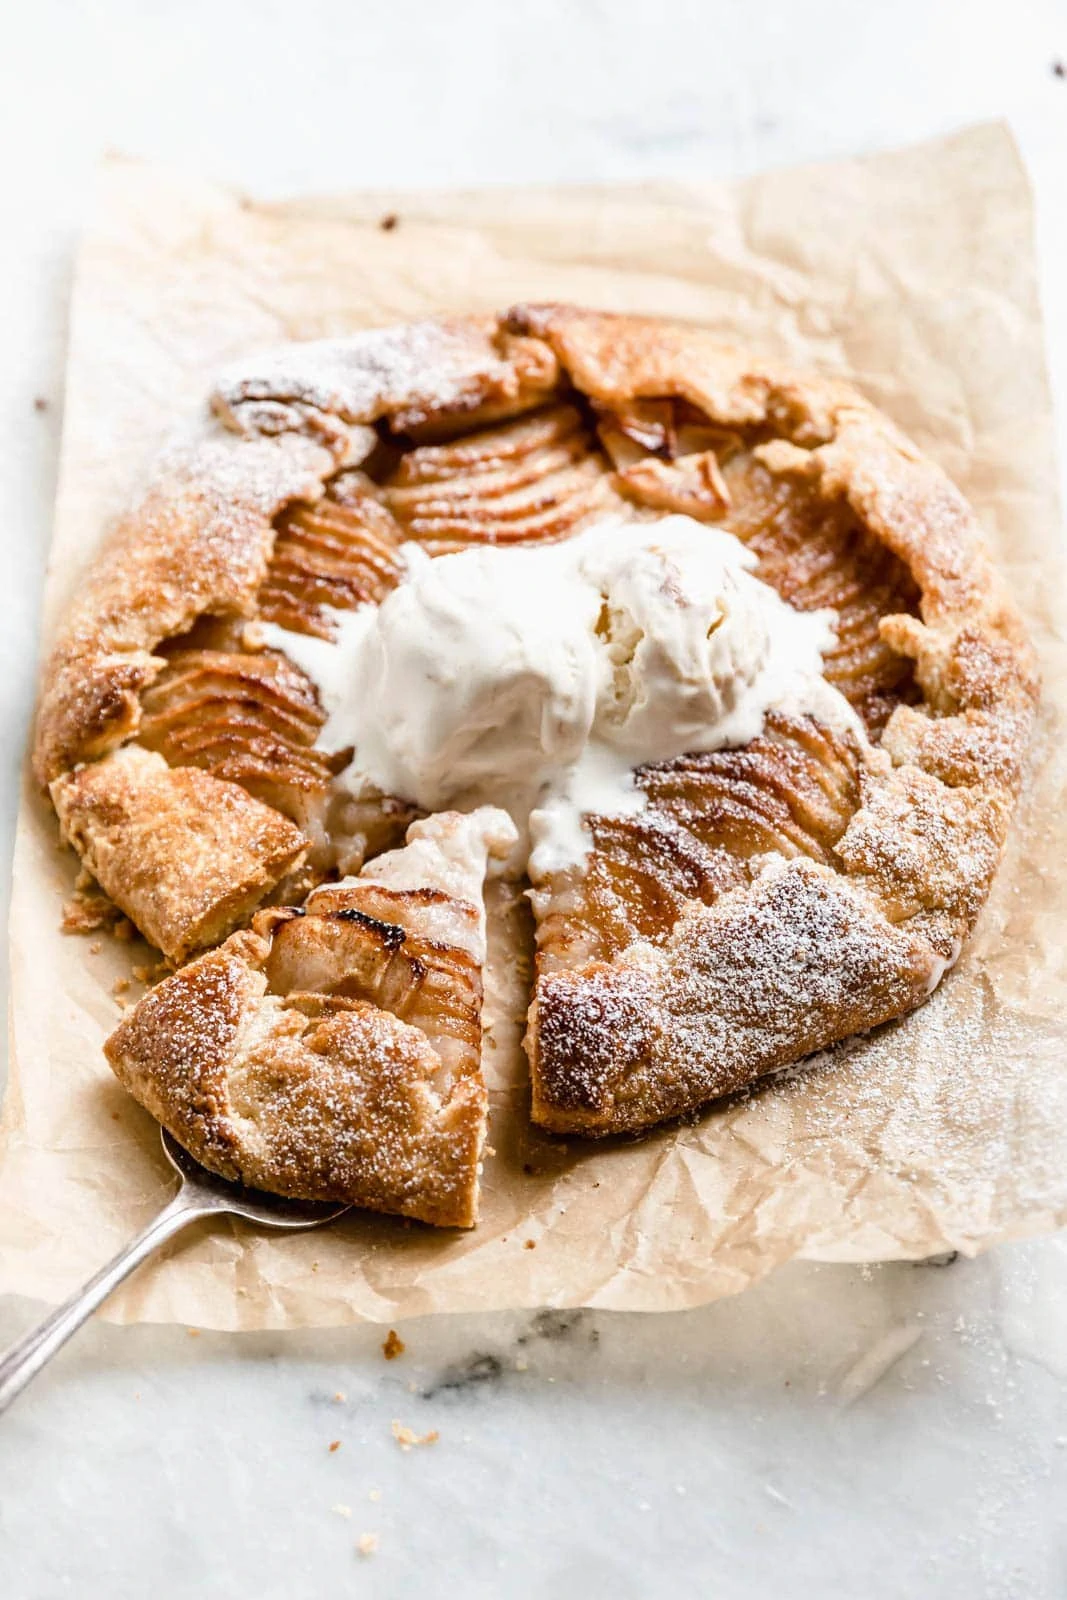 All the taste of apple pie, but half the work. This Cinnamon Apple Galette is just perfect for an easy but delicious dessert.